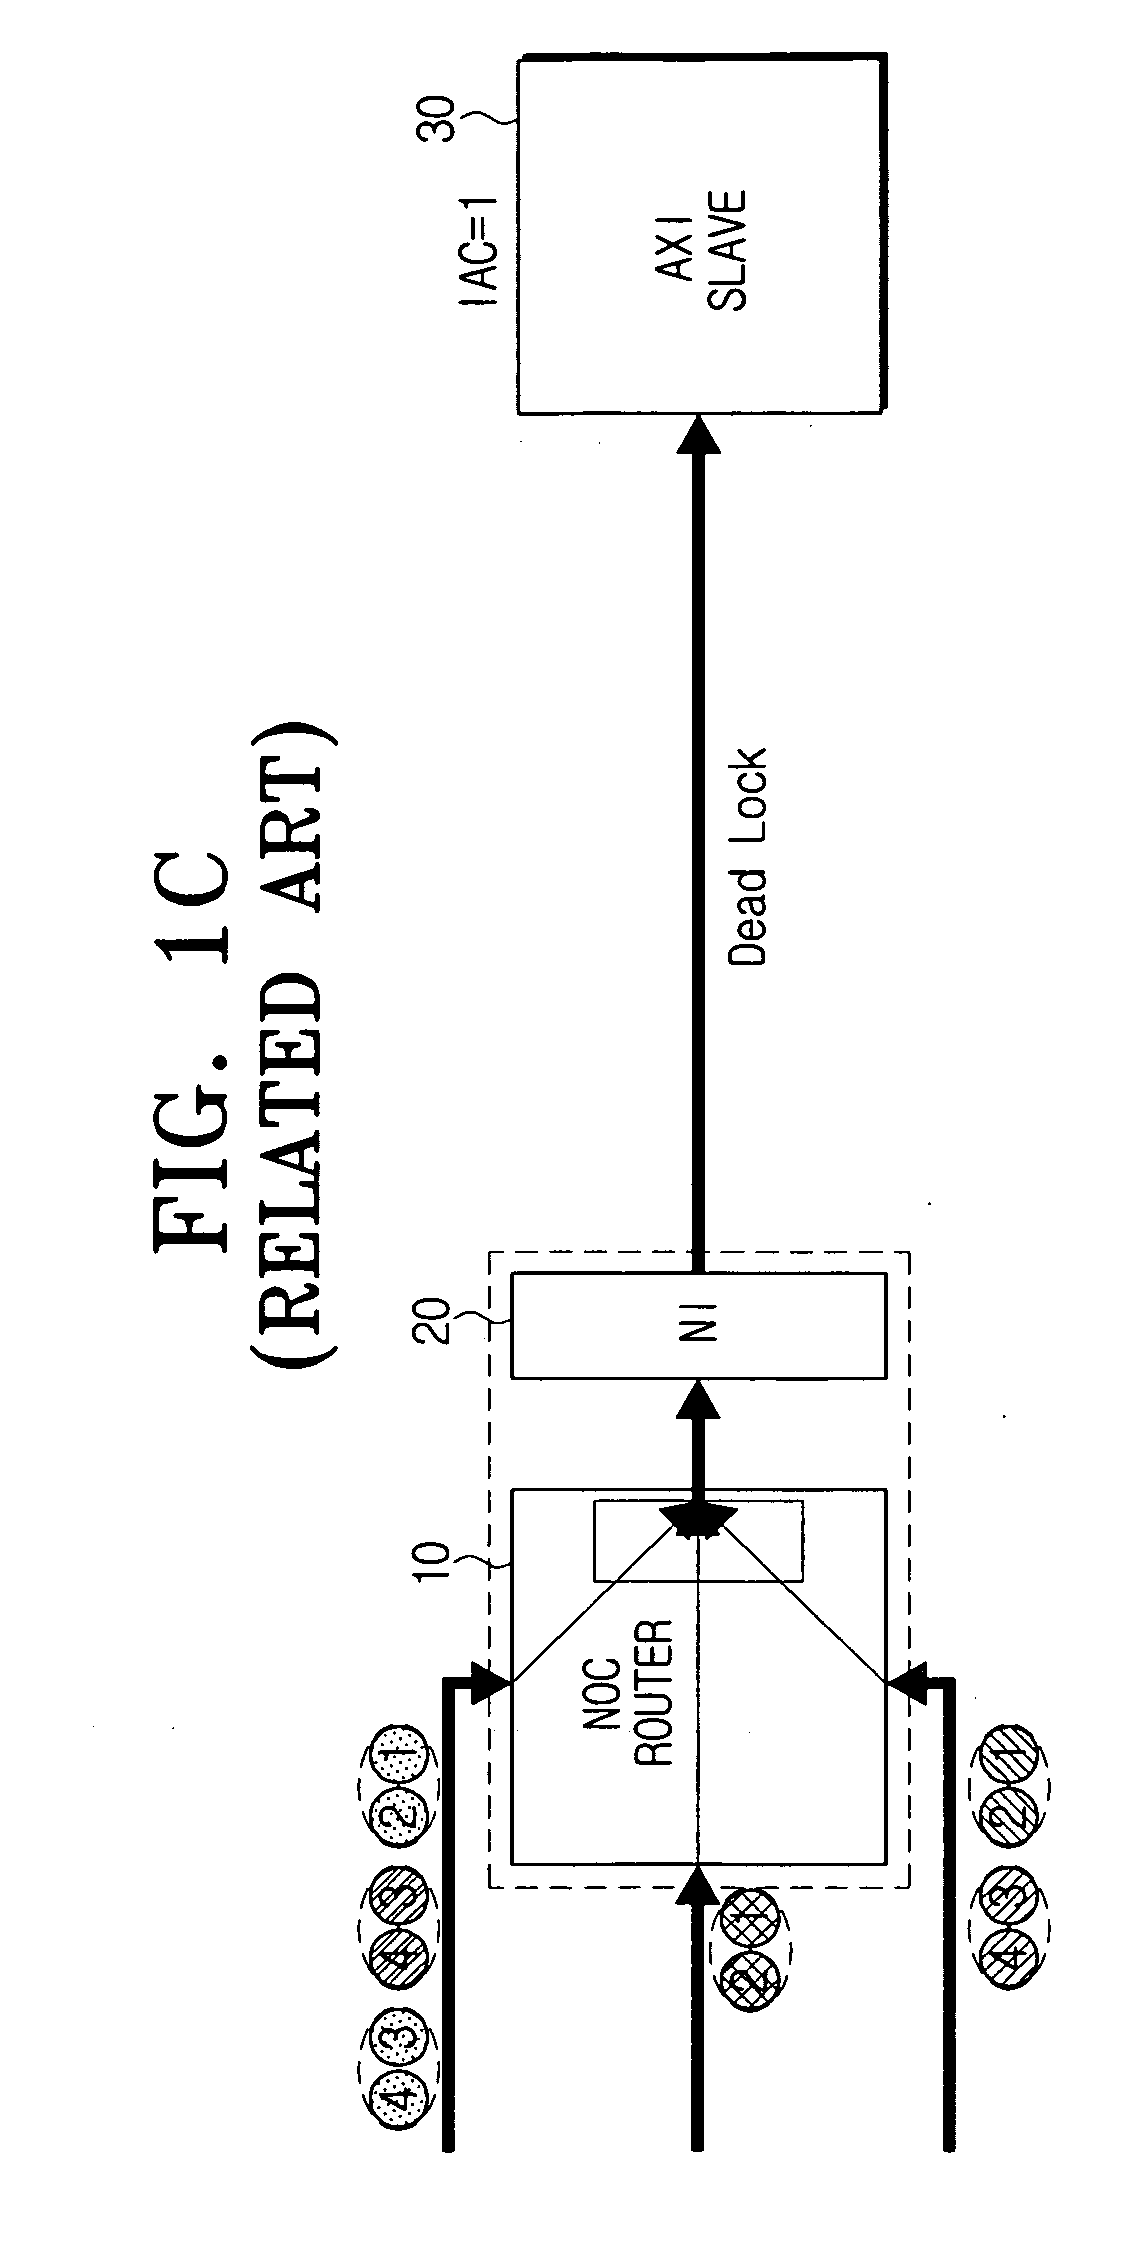 NoC system employing AXI protocol and interleaving method thereof